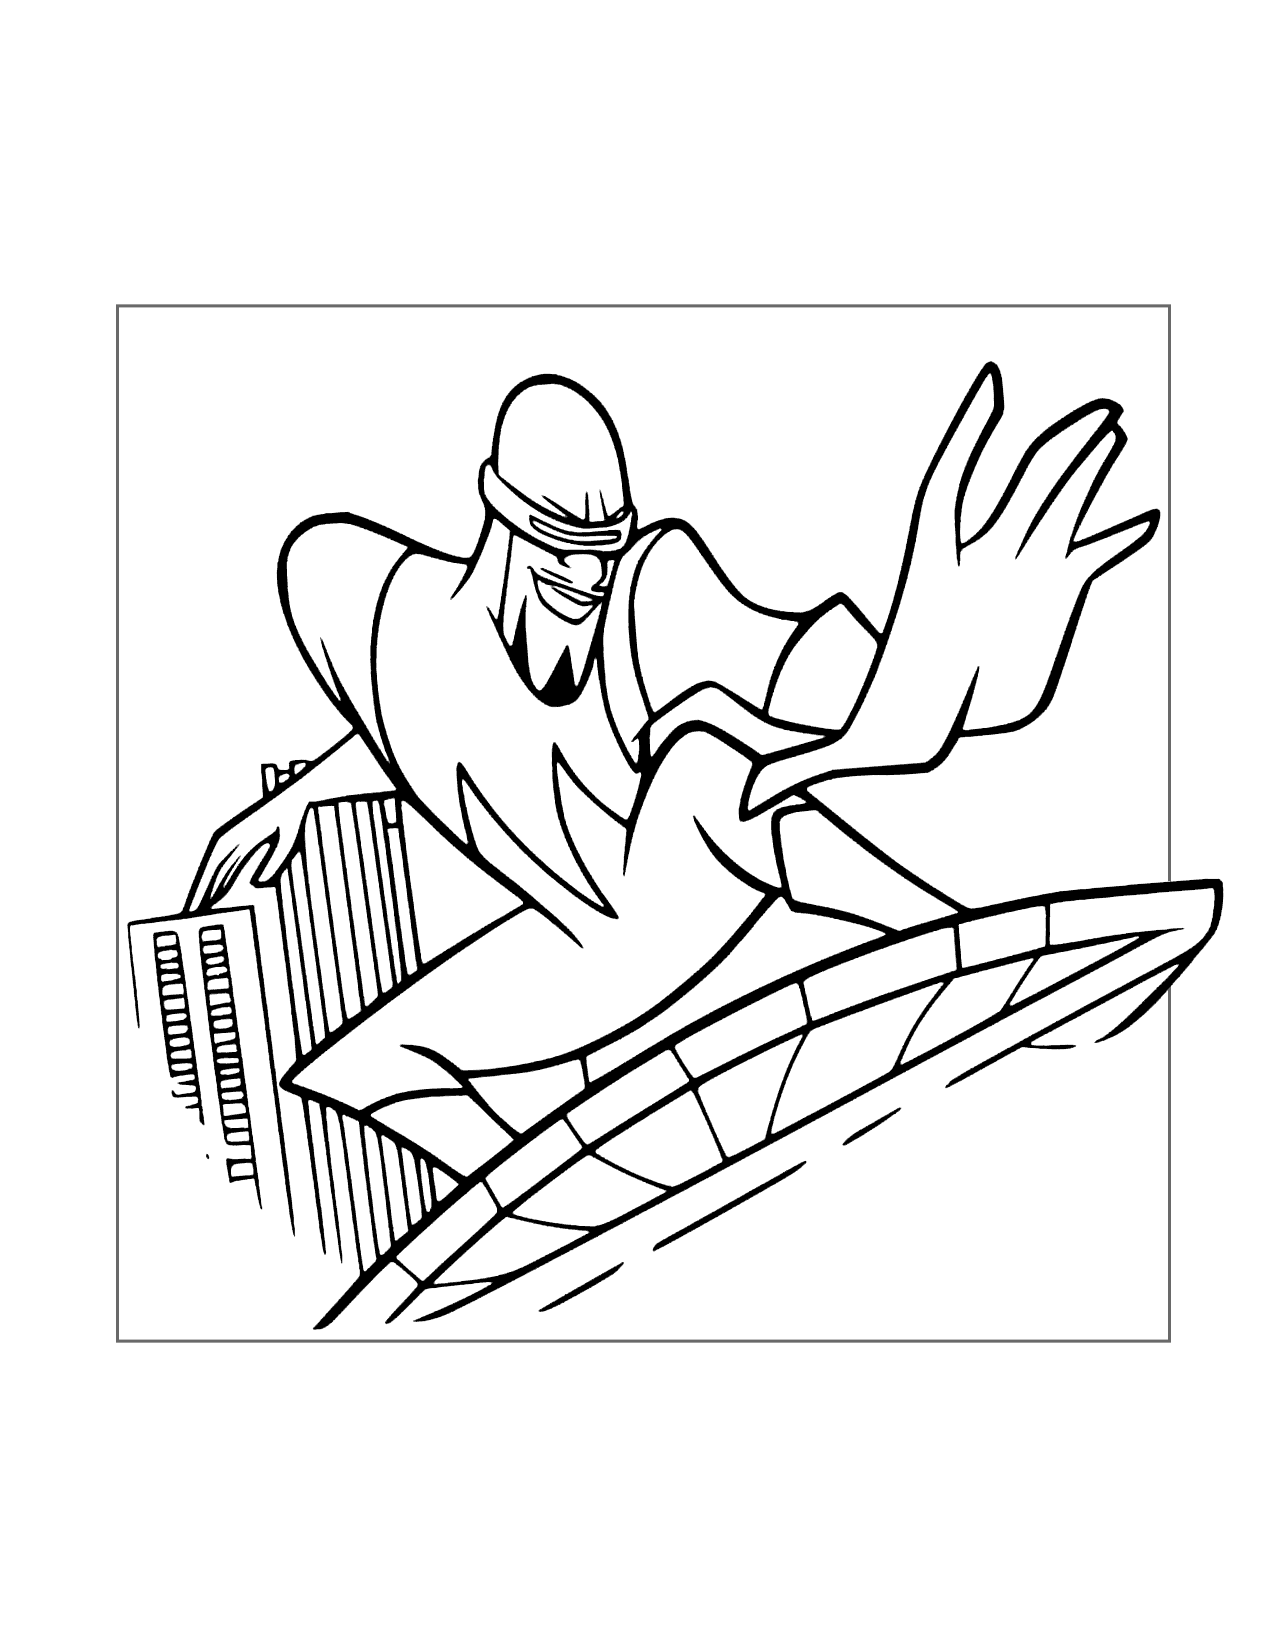 Frozone The Incredibles Coloring Page